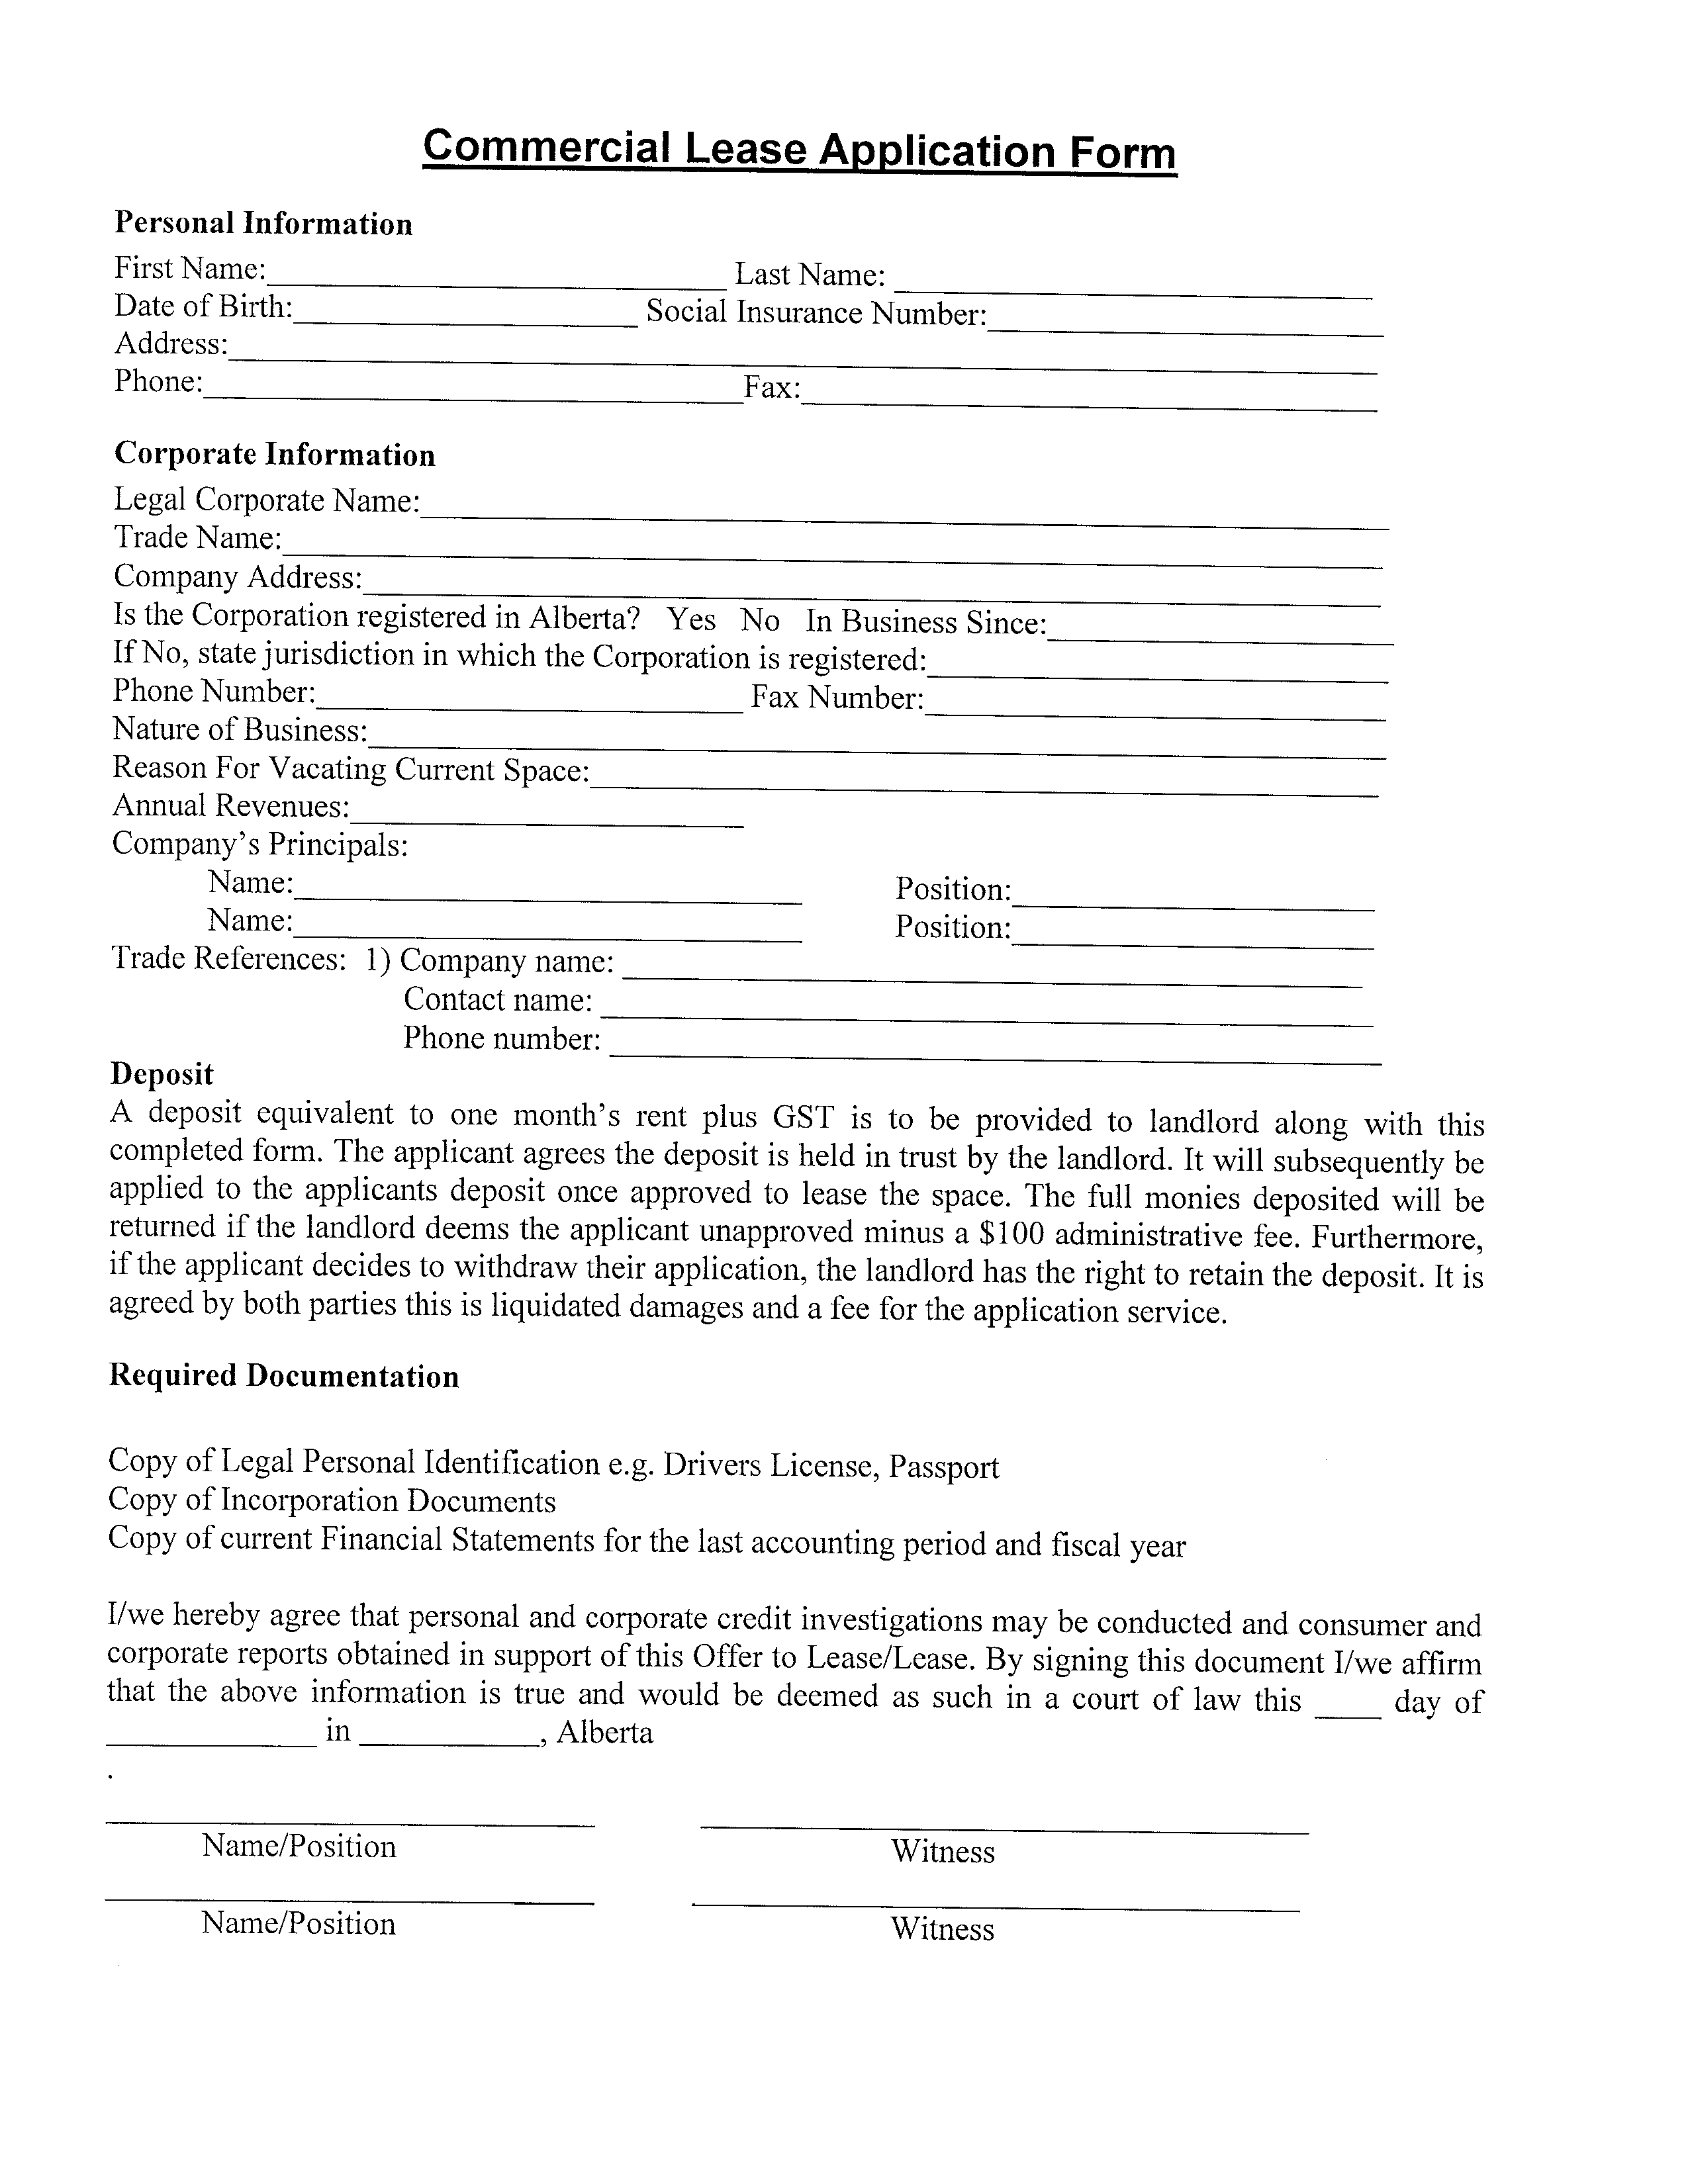 Blank Commercial Lease Application Form main image